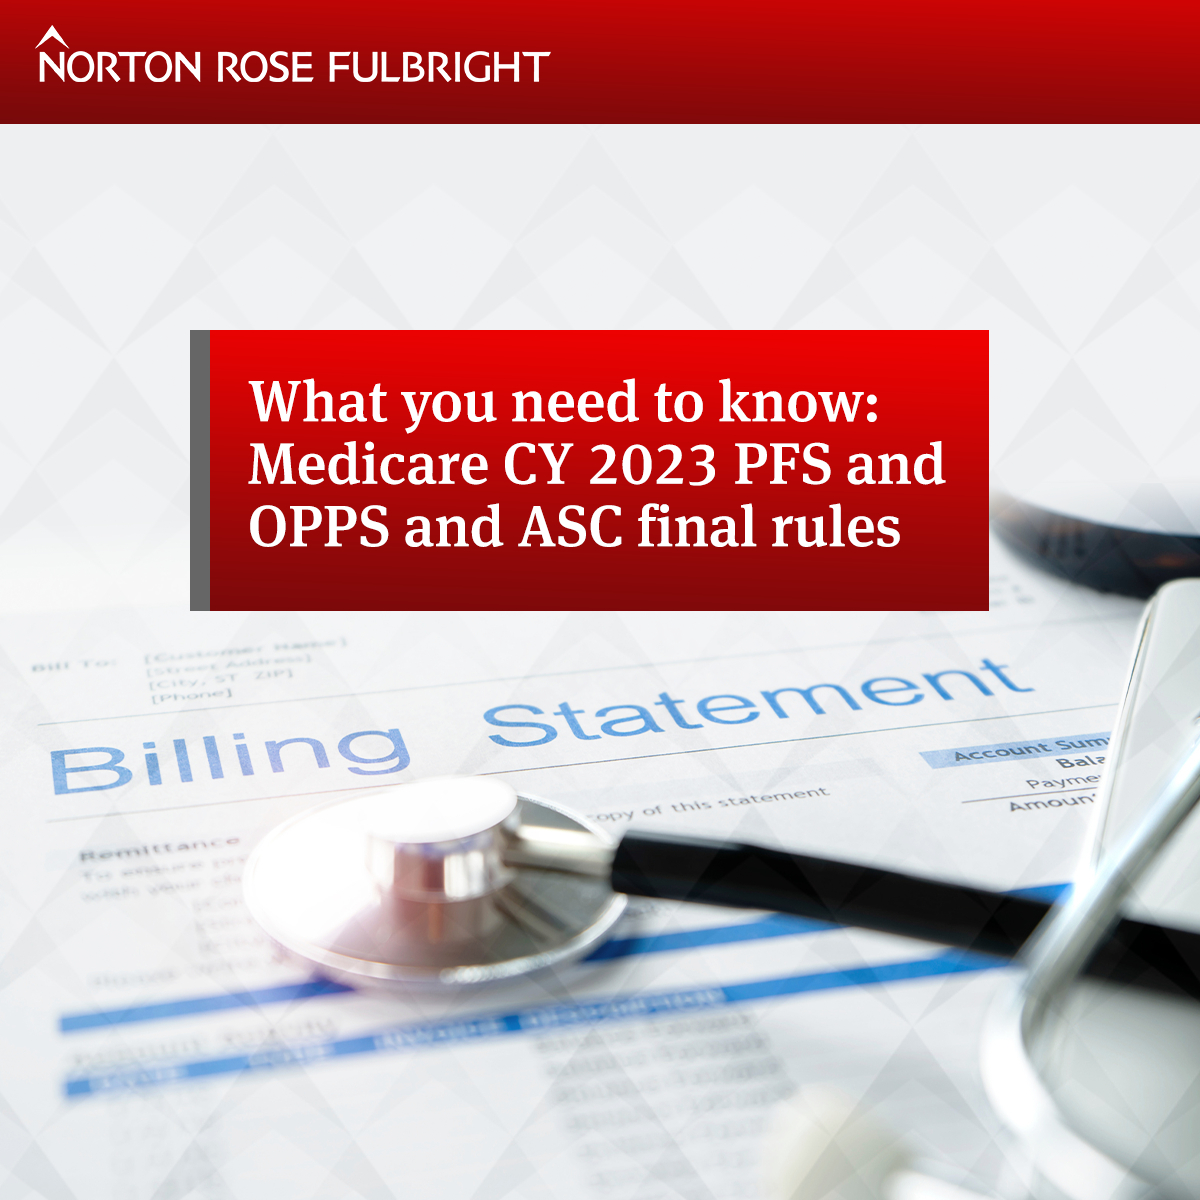 What you need to know Medicare CY 2023 PFS and OPPS and ASC final